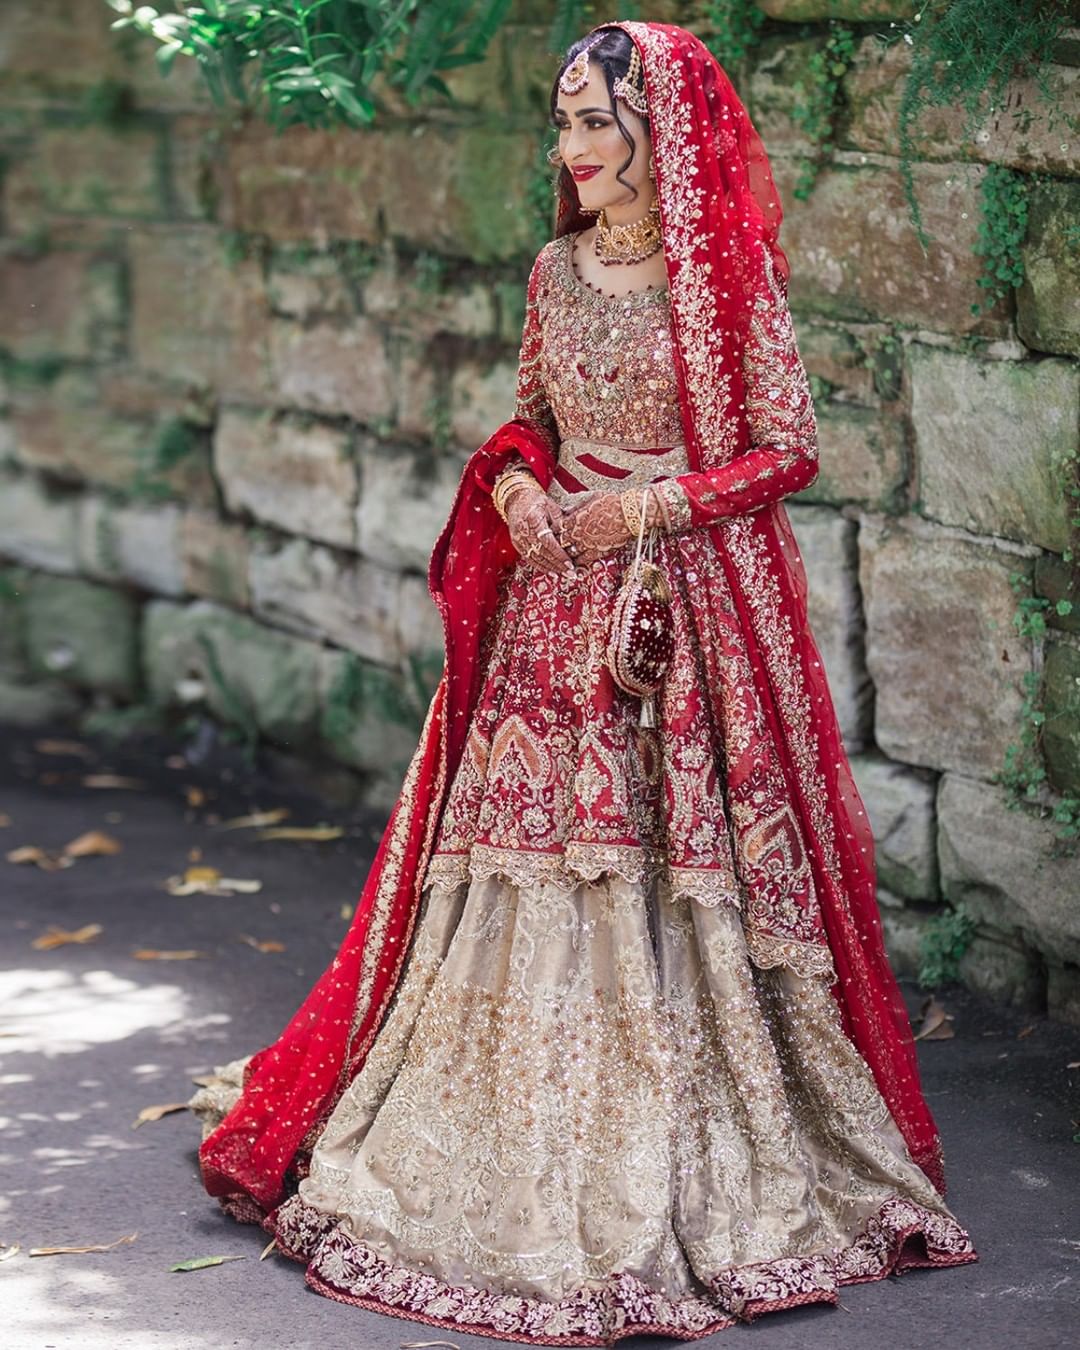 Photo of A bride in a red lehenga with peplum top wirling on her wedding day-gemektower.com.vn